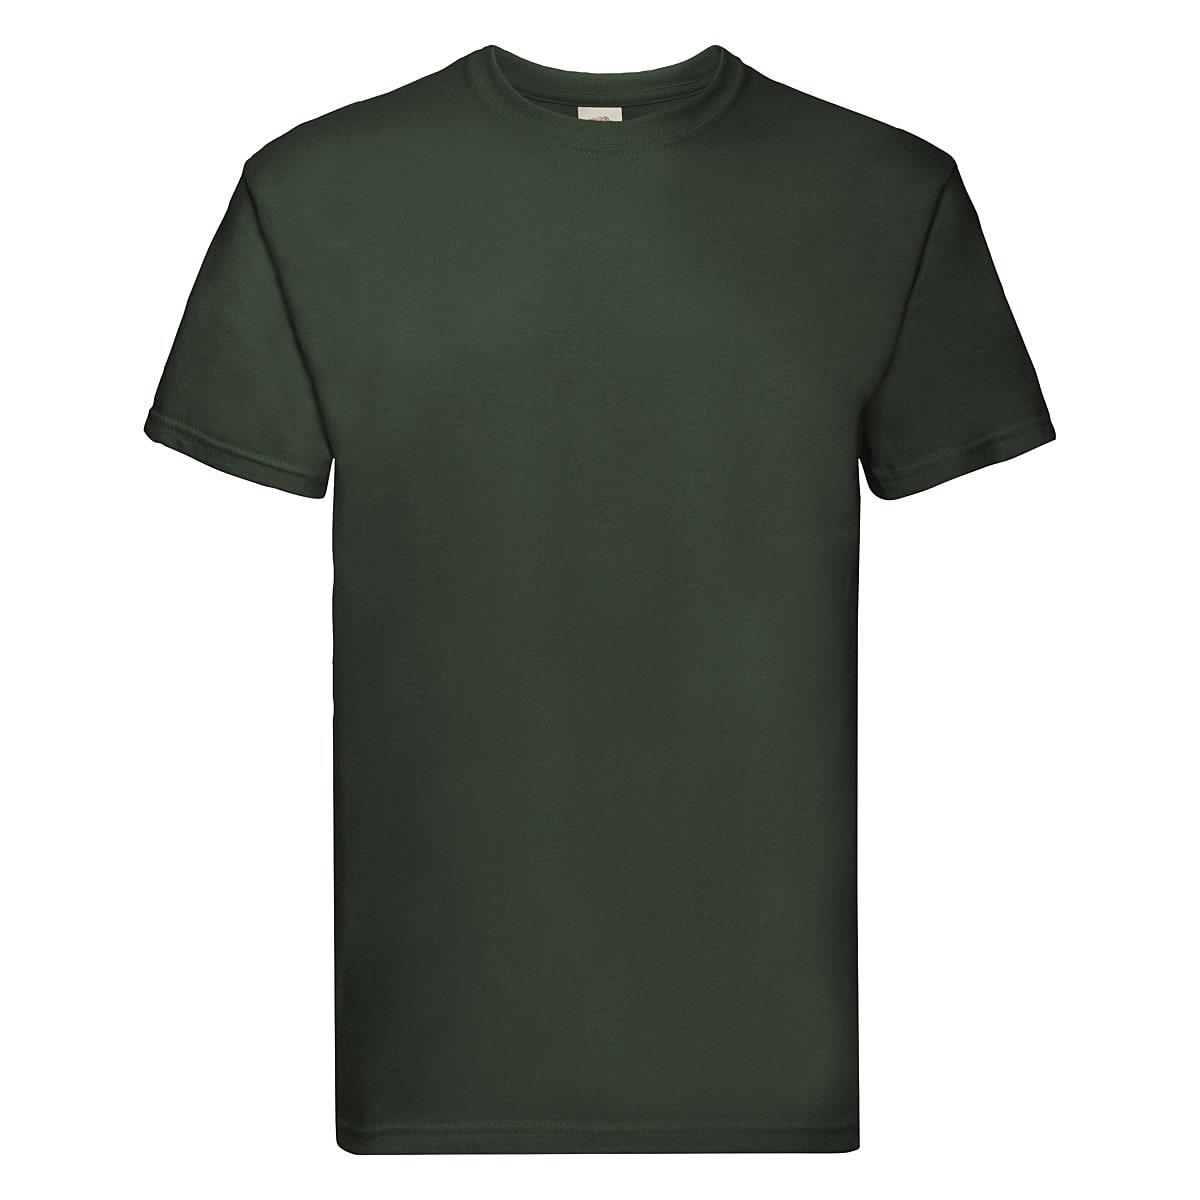 Fruit Of The Loom Super Premium T-Shirt in Bottle Green (Product Code: 61044)